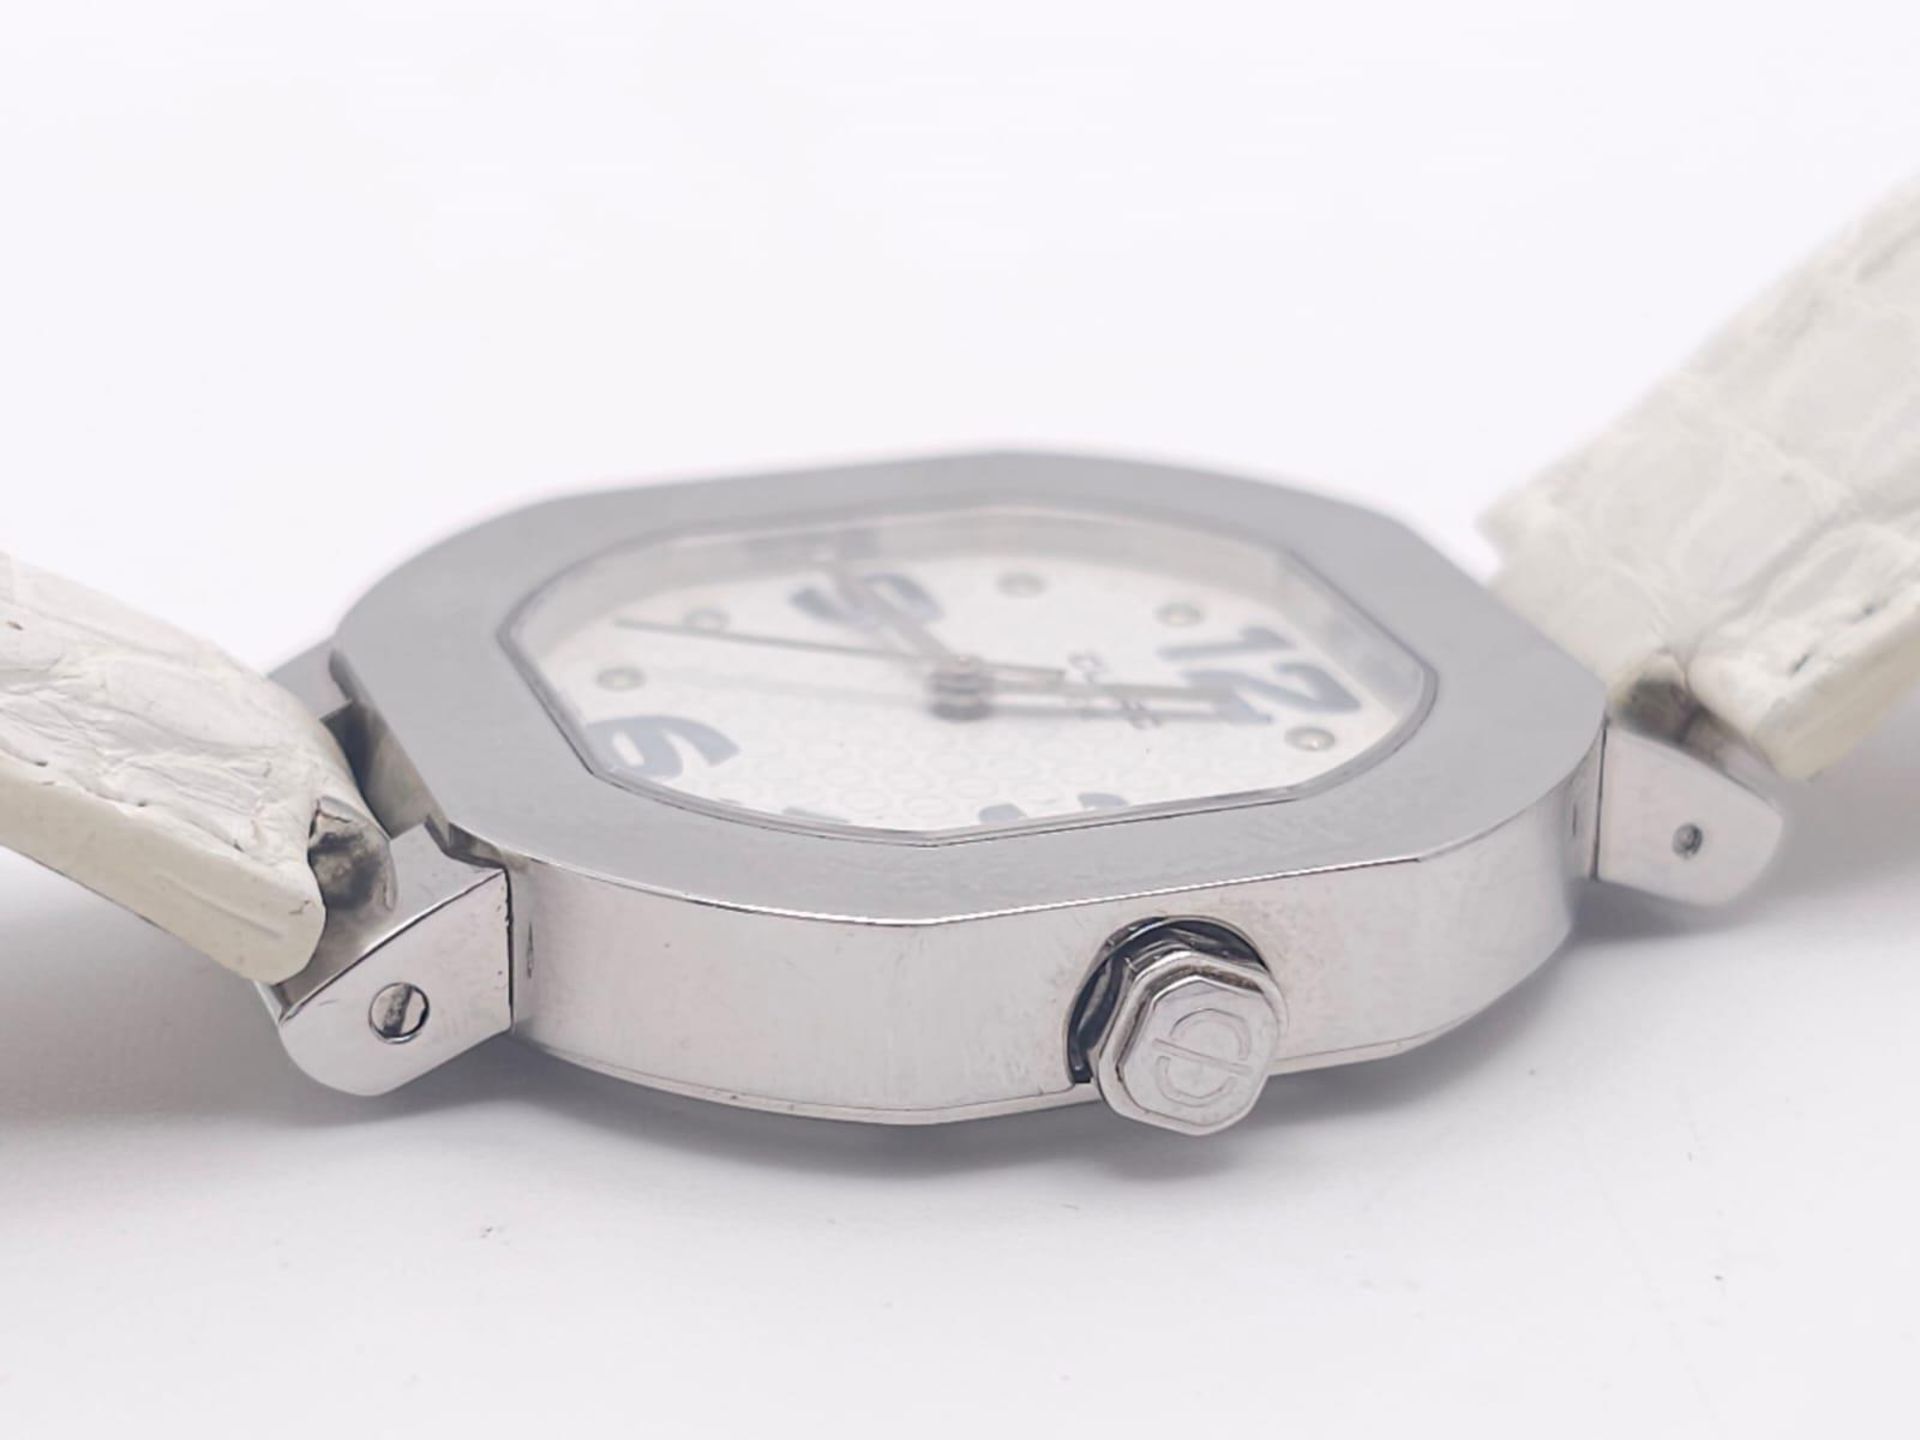 A Clerc C-One Designer Swiss Quartz Gents Watch. White leather strap. Stainless steel case - 36mm. - Image 4 of 10